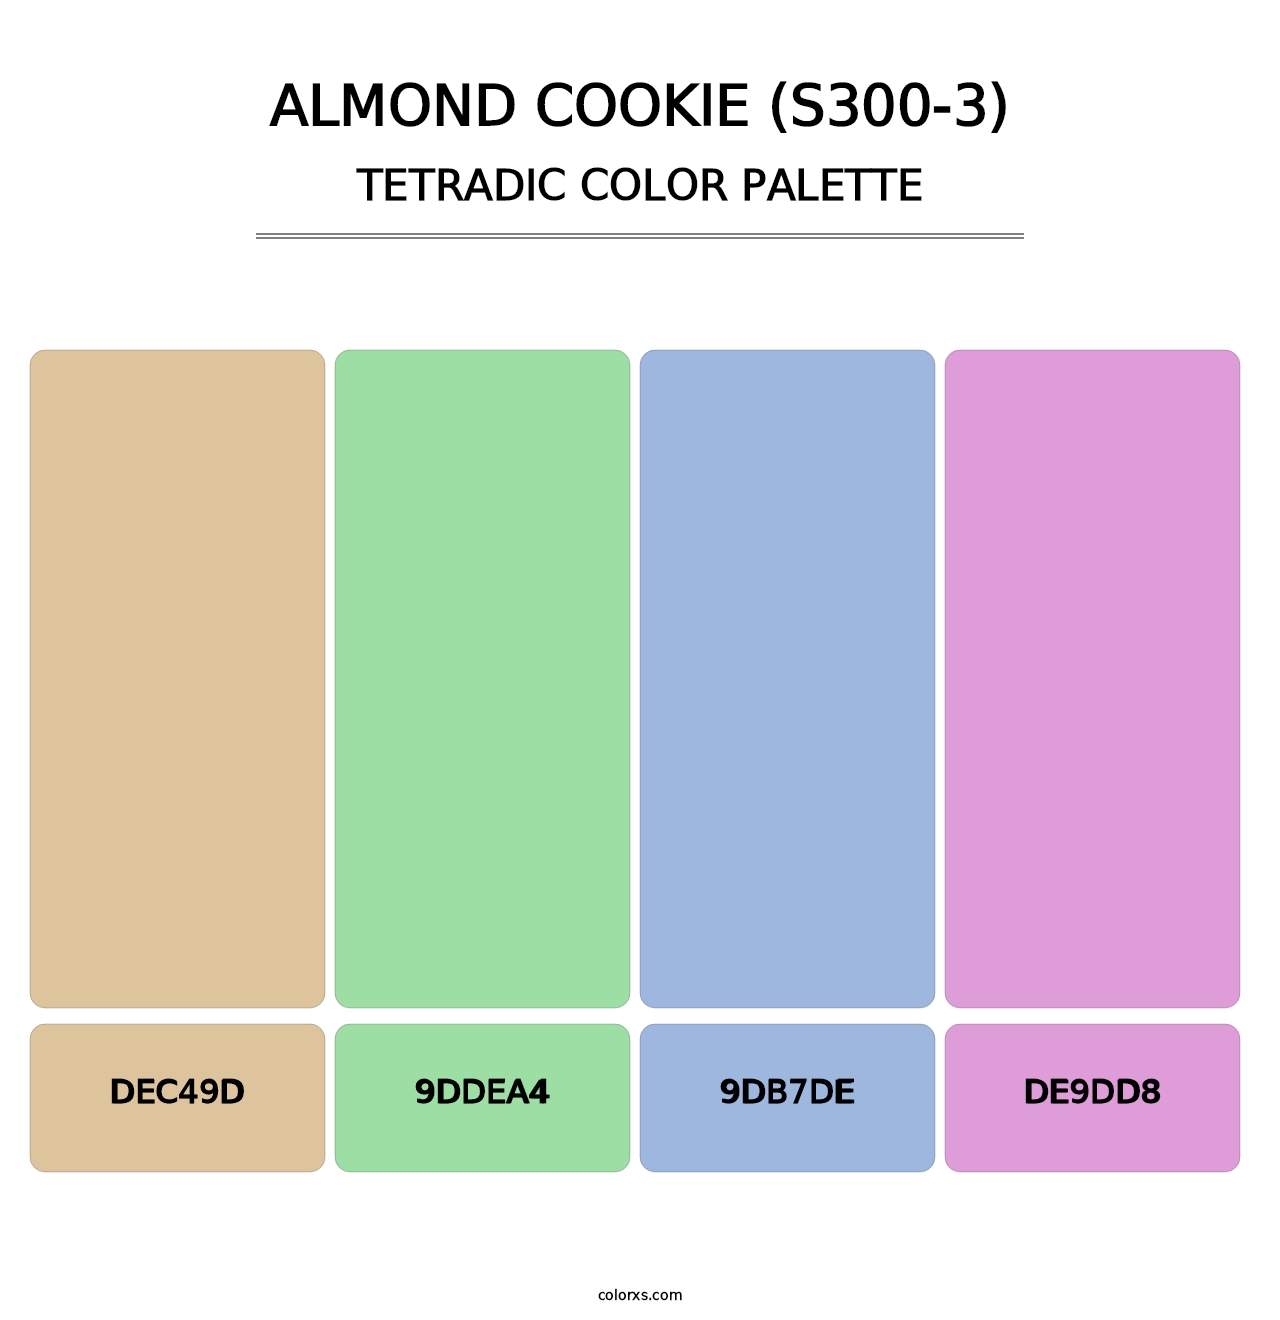 Almond Cookie (S300-3) - Tetradic Color Palette